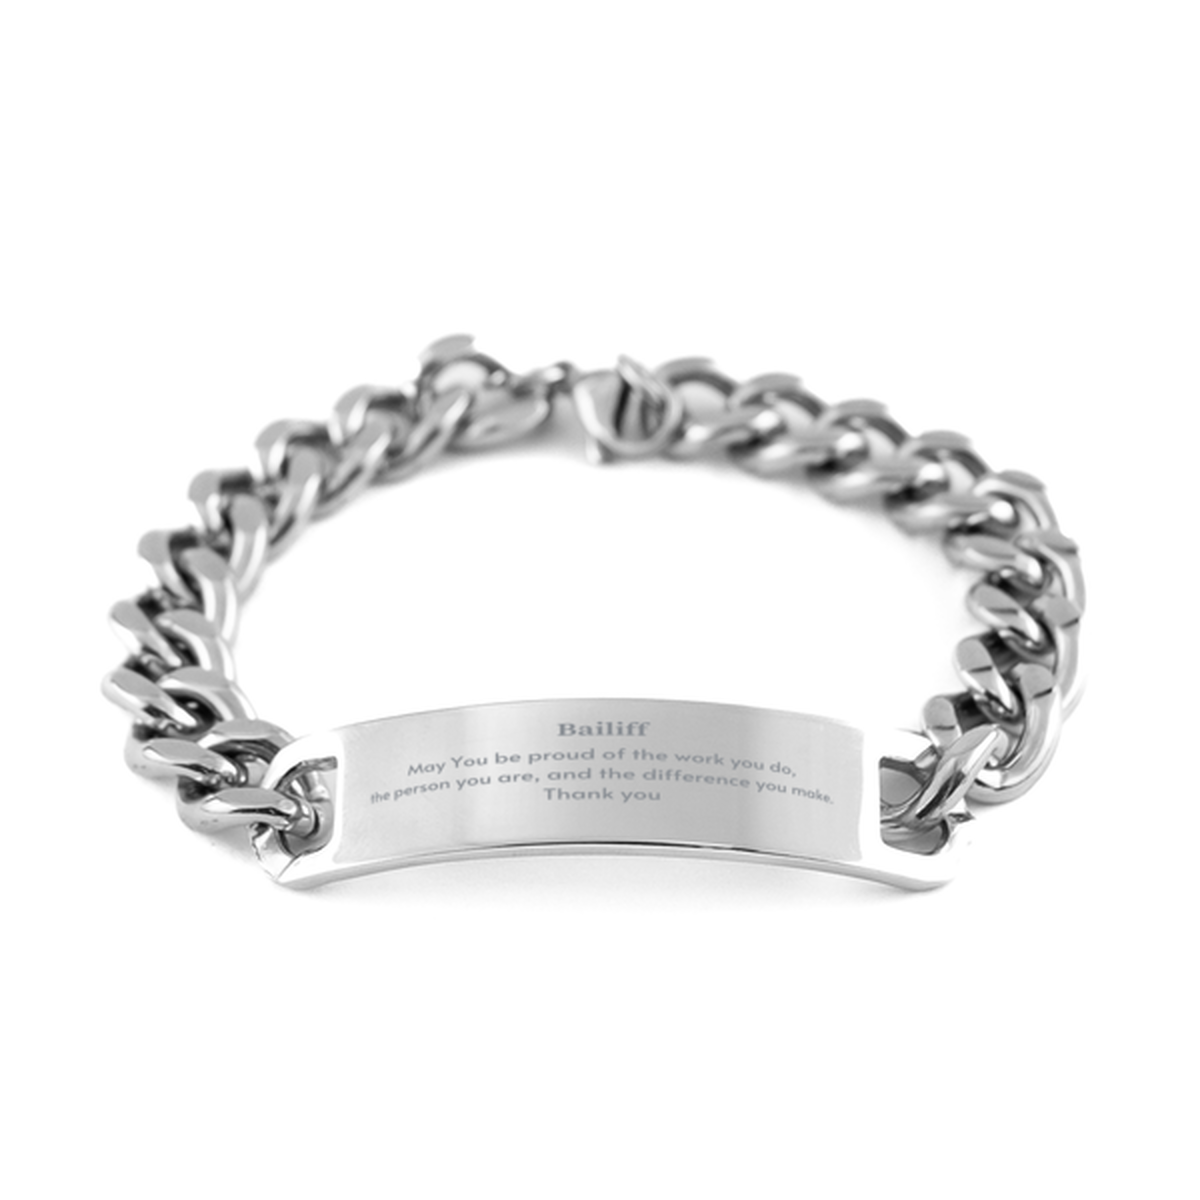 Heartwarming Cuban Chain Stainless Steel Bracelet Retirement Coworkers Gifts for Bailiff, Bailiff May You be proud of the work you do, the person you are Gifts for Boss Men Women Friends